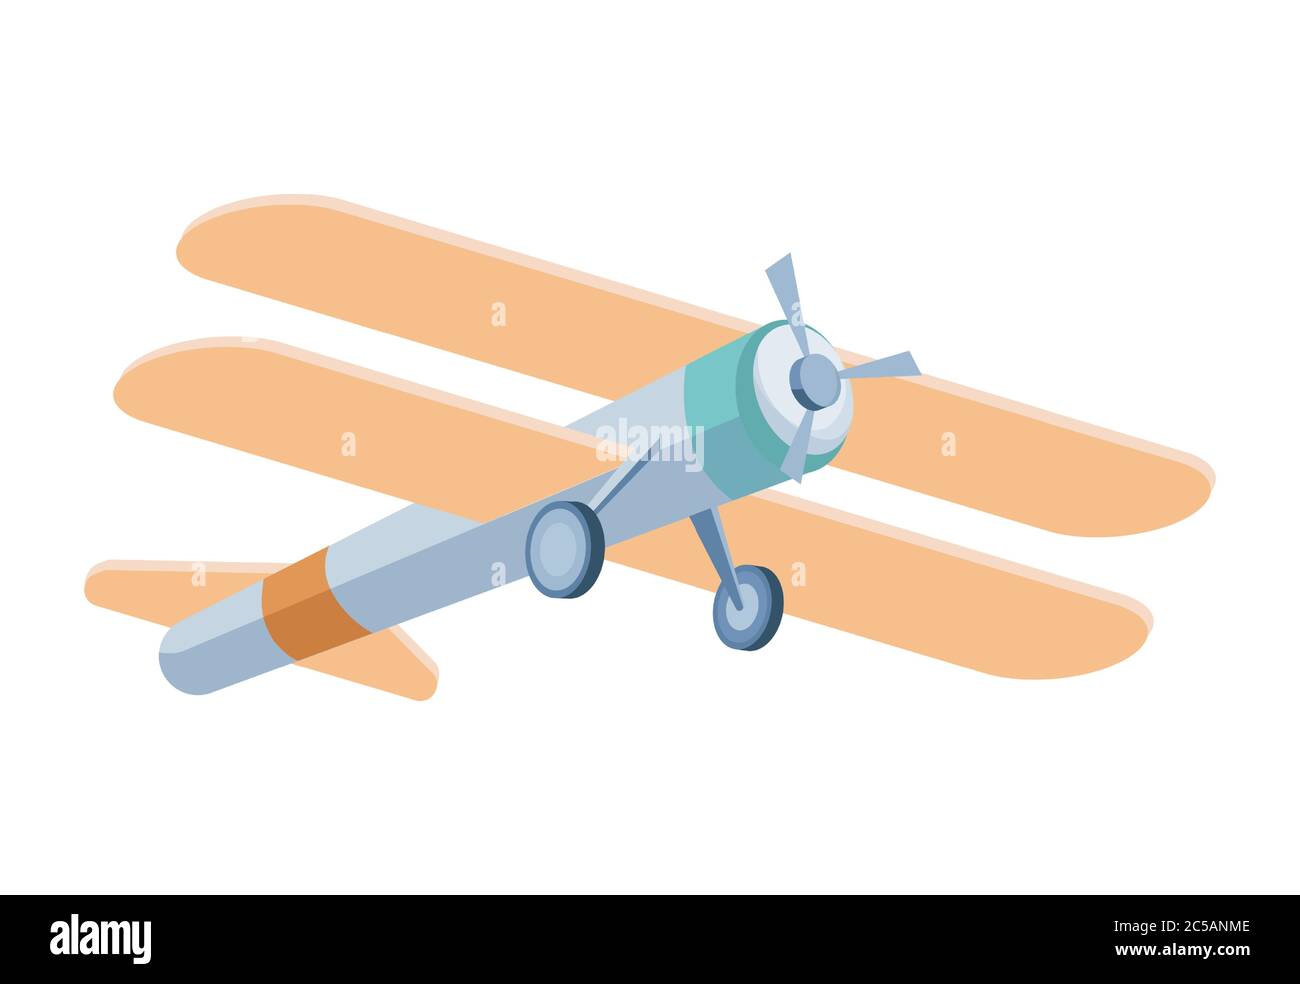 Retro classic biplane in flight vector flat illustration isolated on white background. Airplane, transportation, flight, travel symbol. Aircraft propeller with two wings. Stock Vector